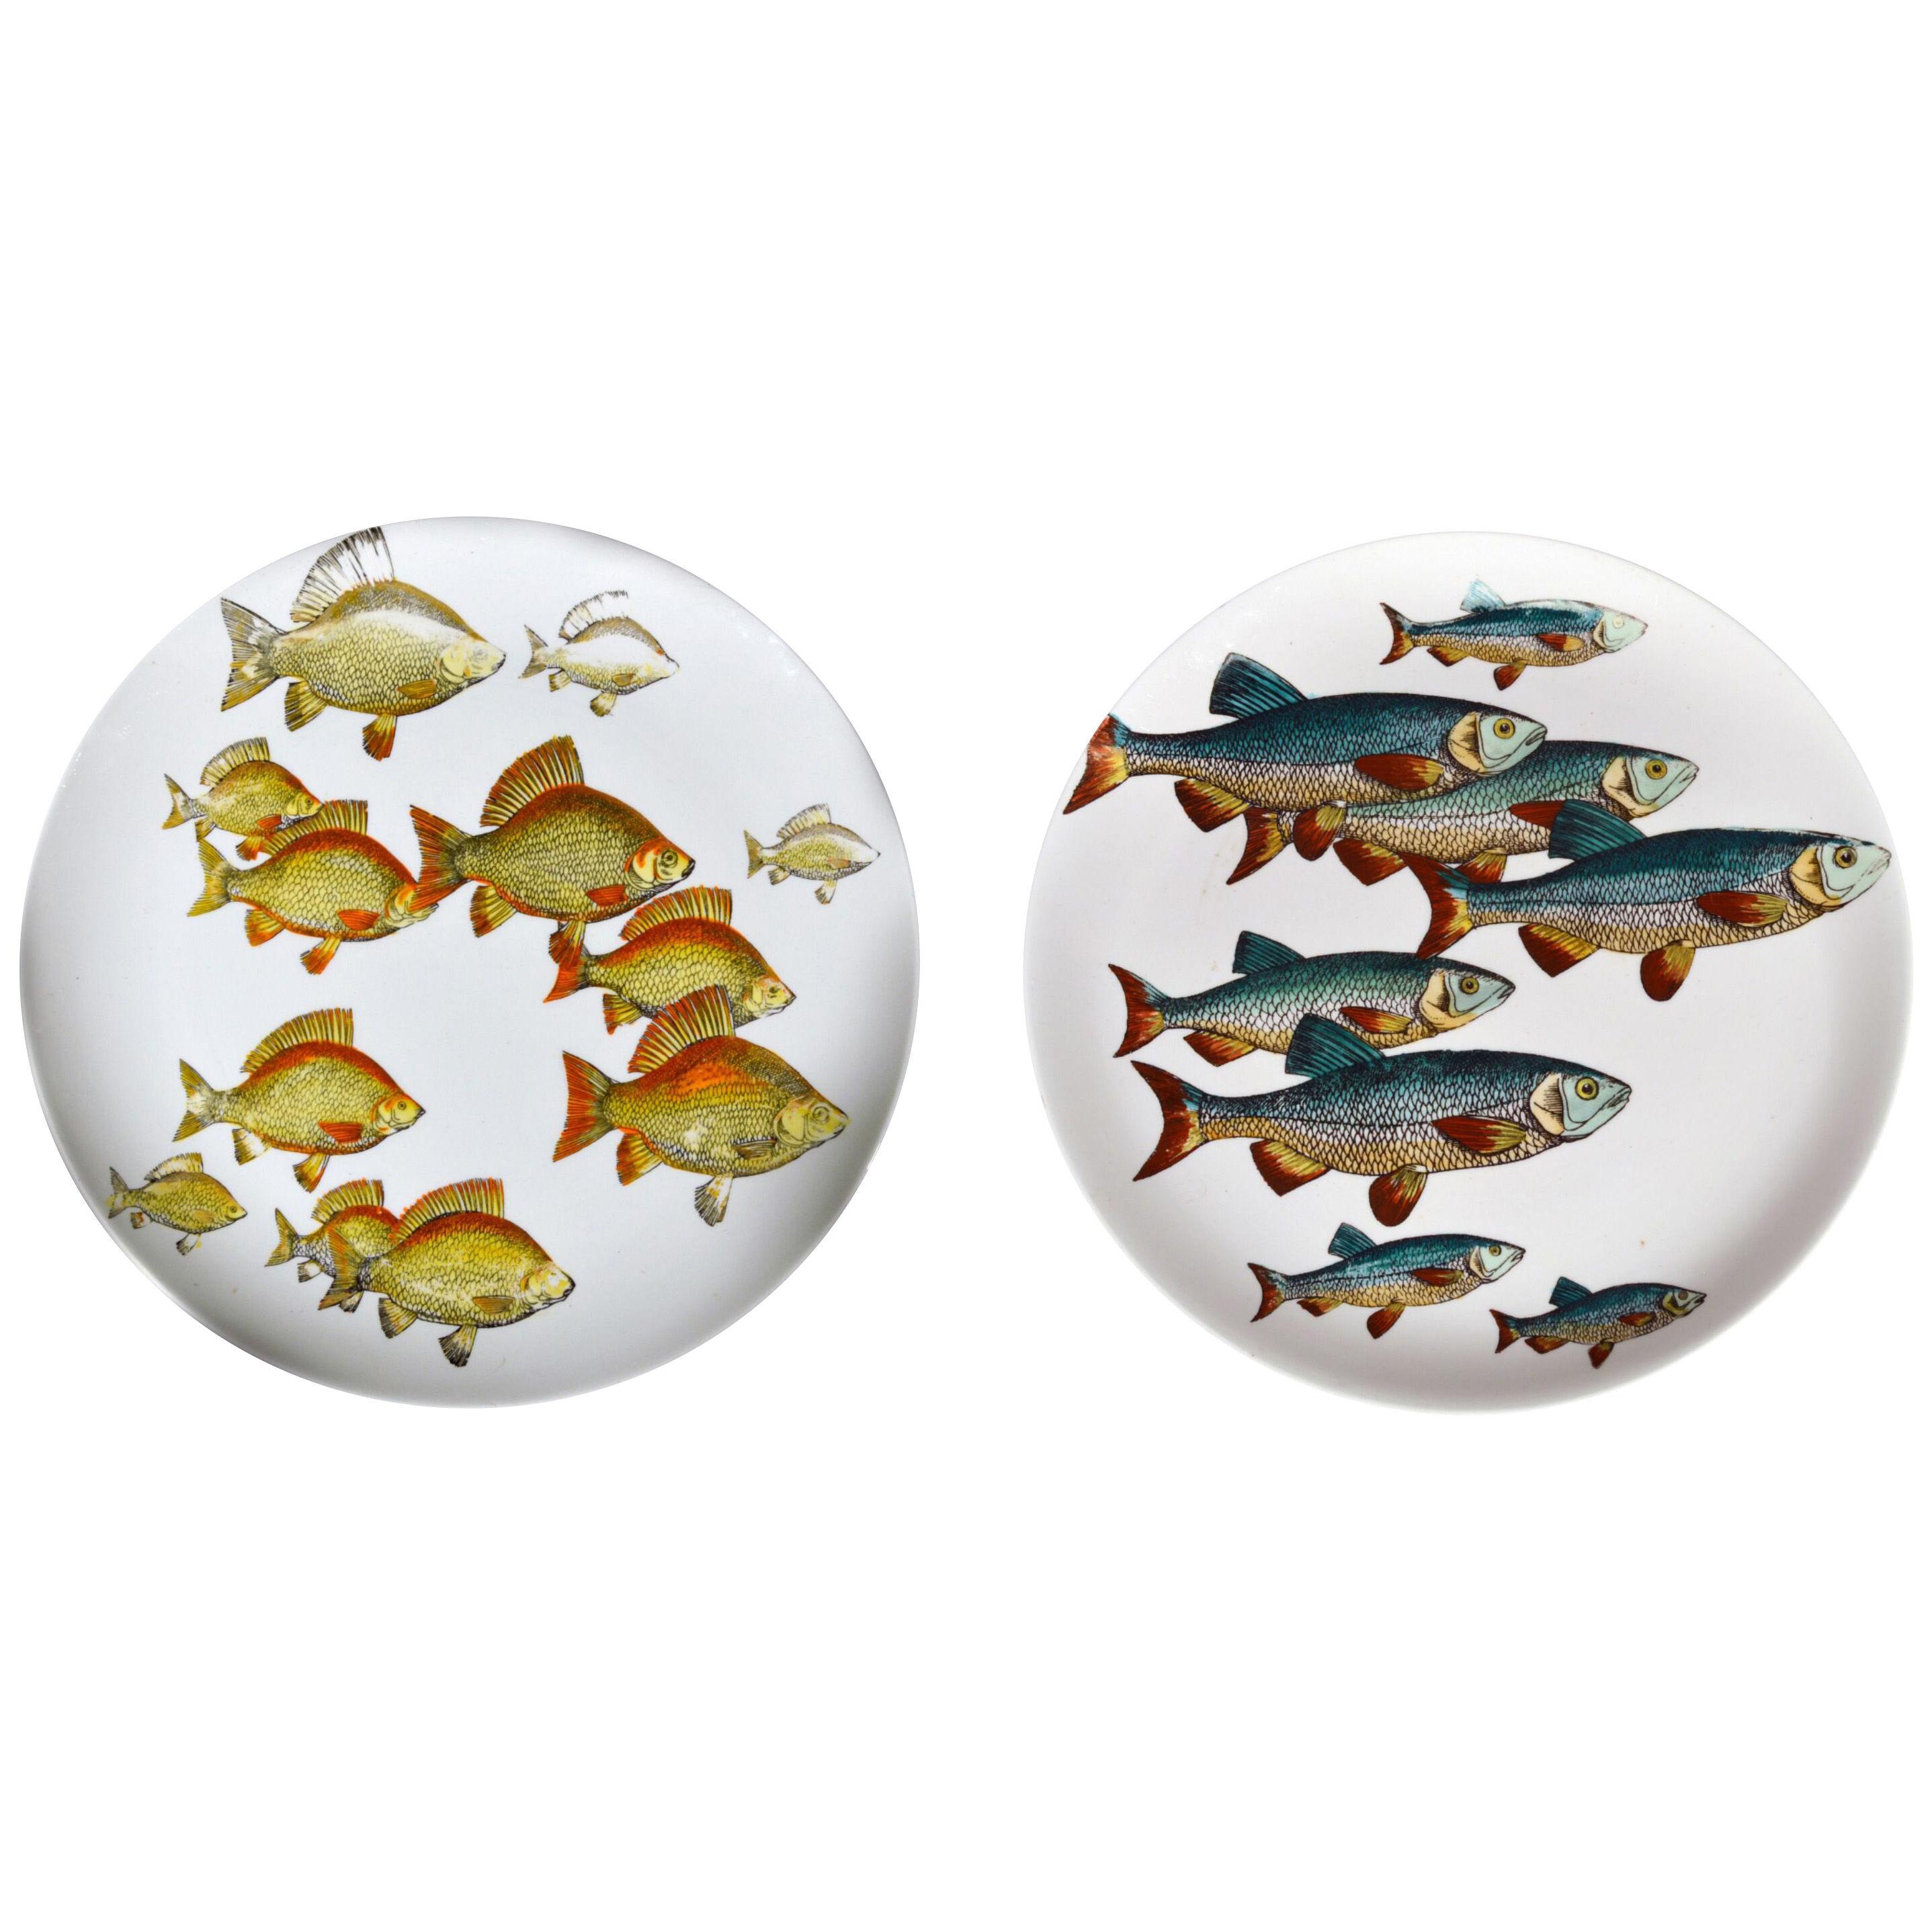 Piero Fornasetti Pottery Pair of Plates with Fish Decoration- Pesci pattern